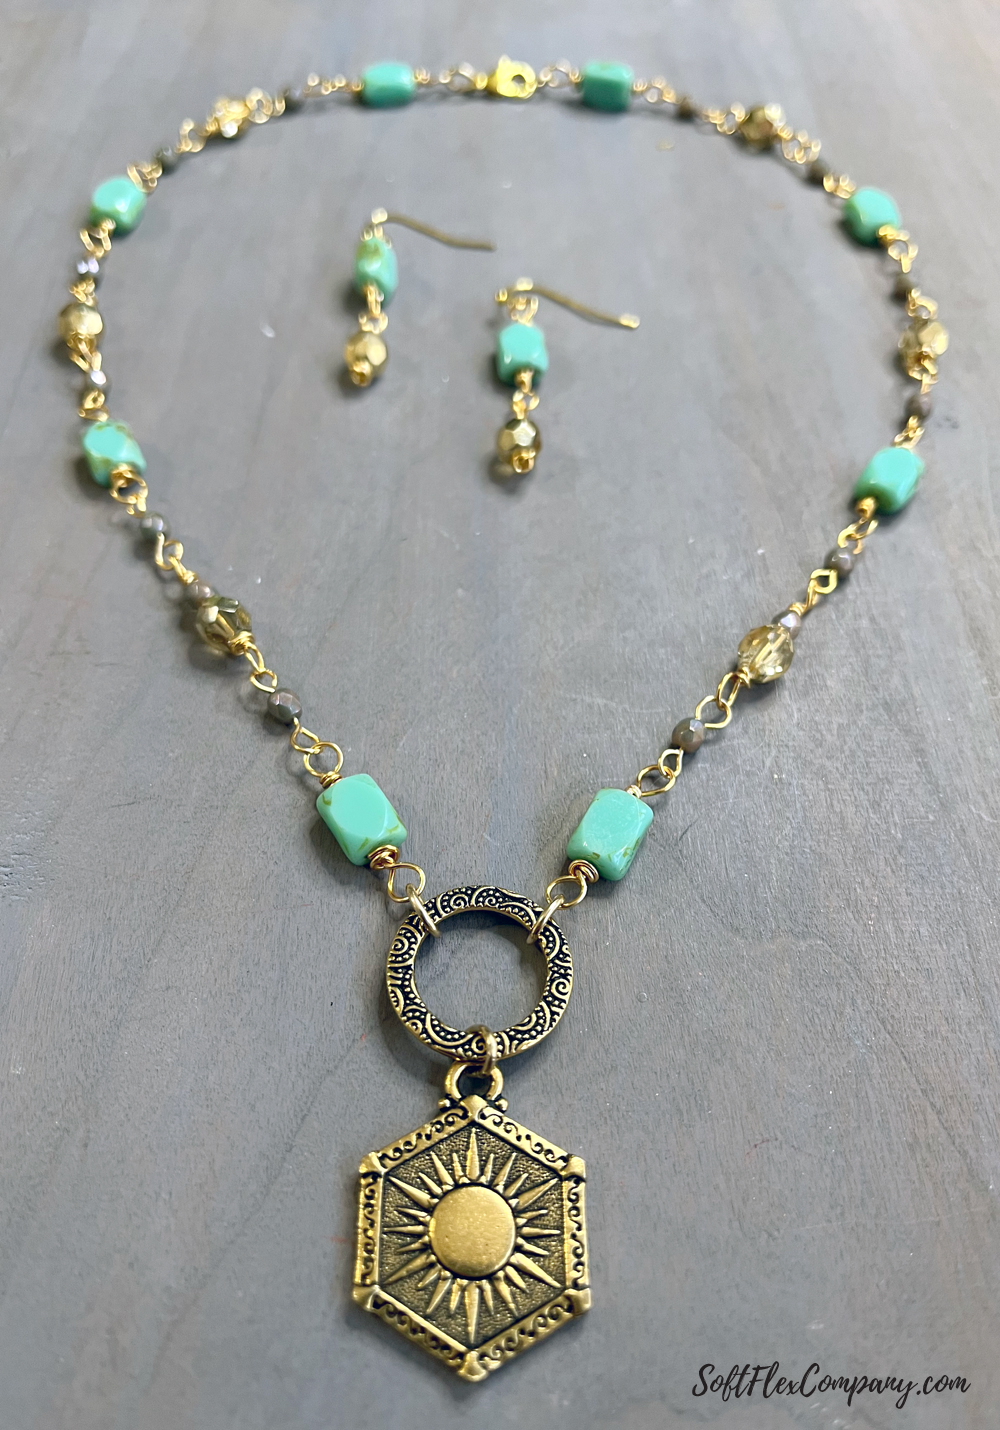 Summer Glam Bead Jewelry with Turquoise & Gold by Kristen Fagan